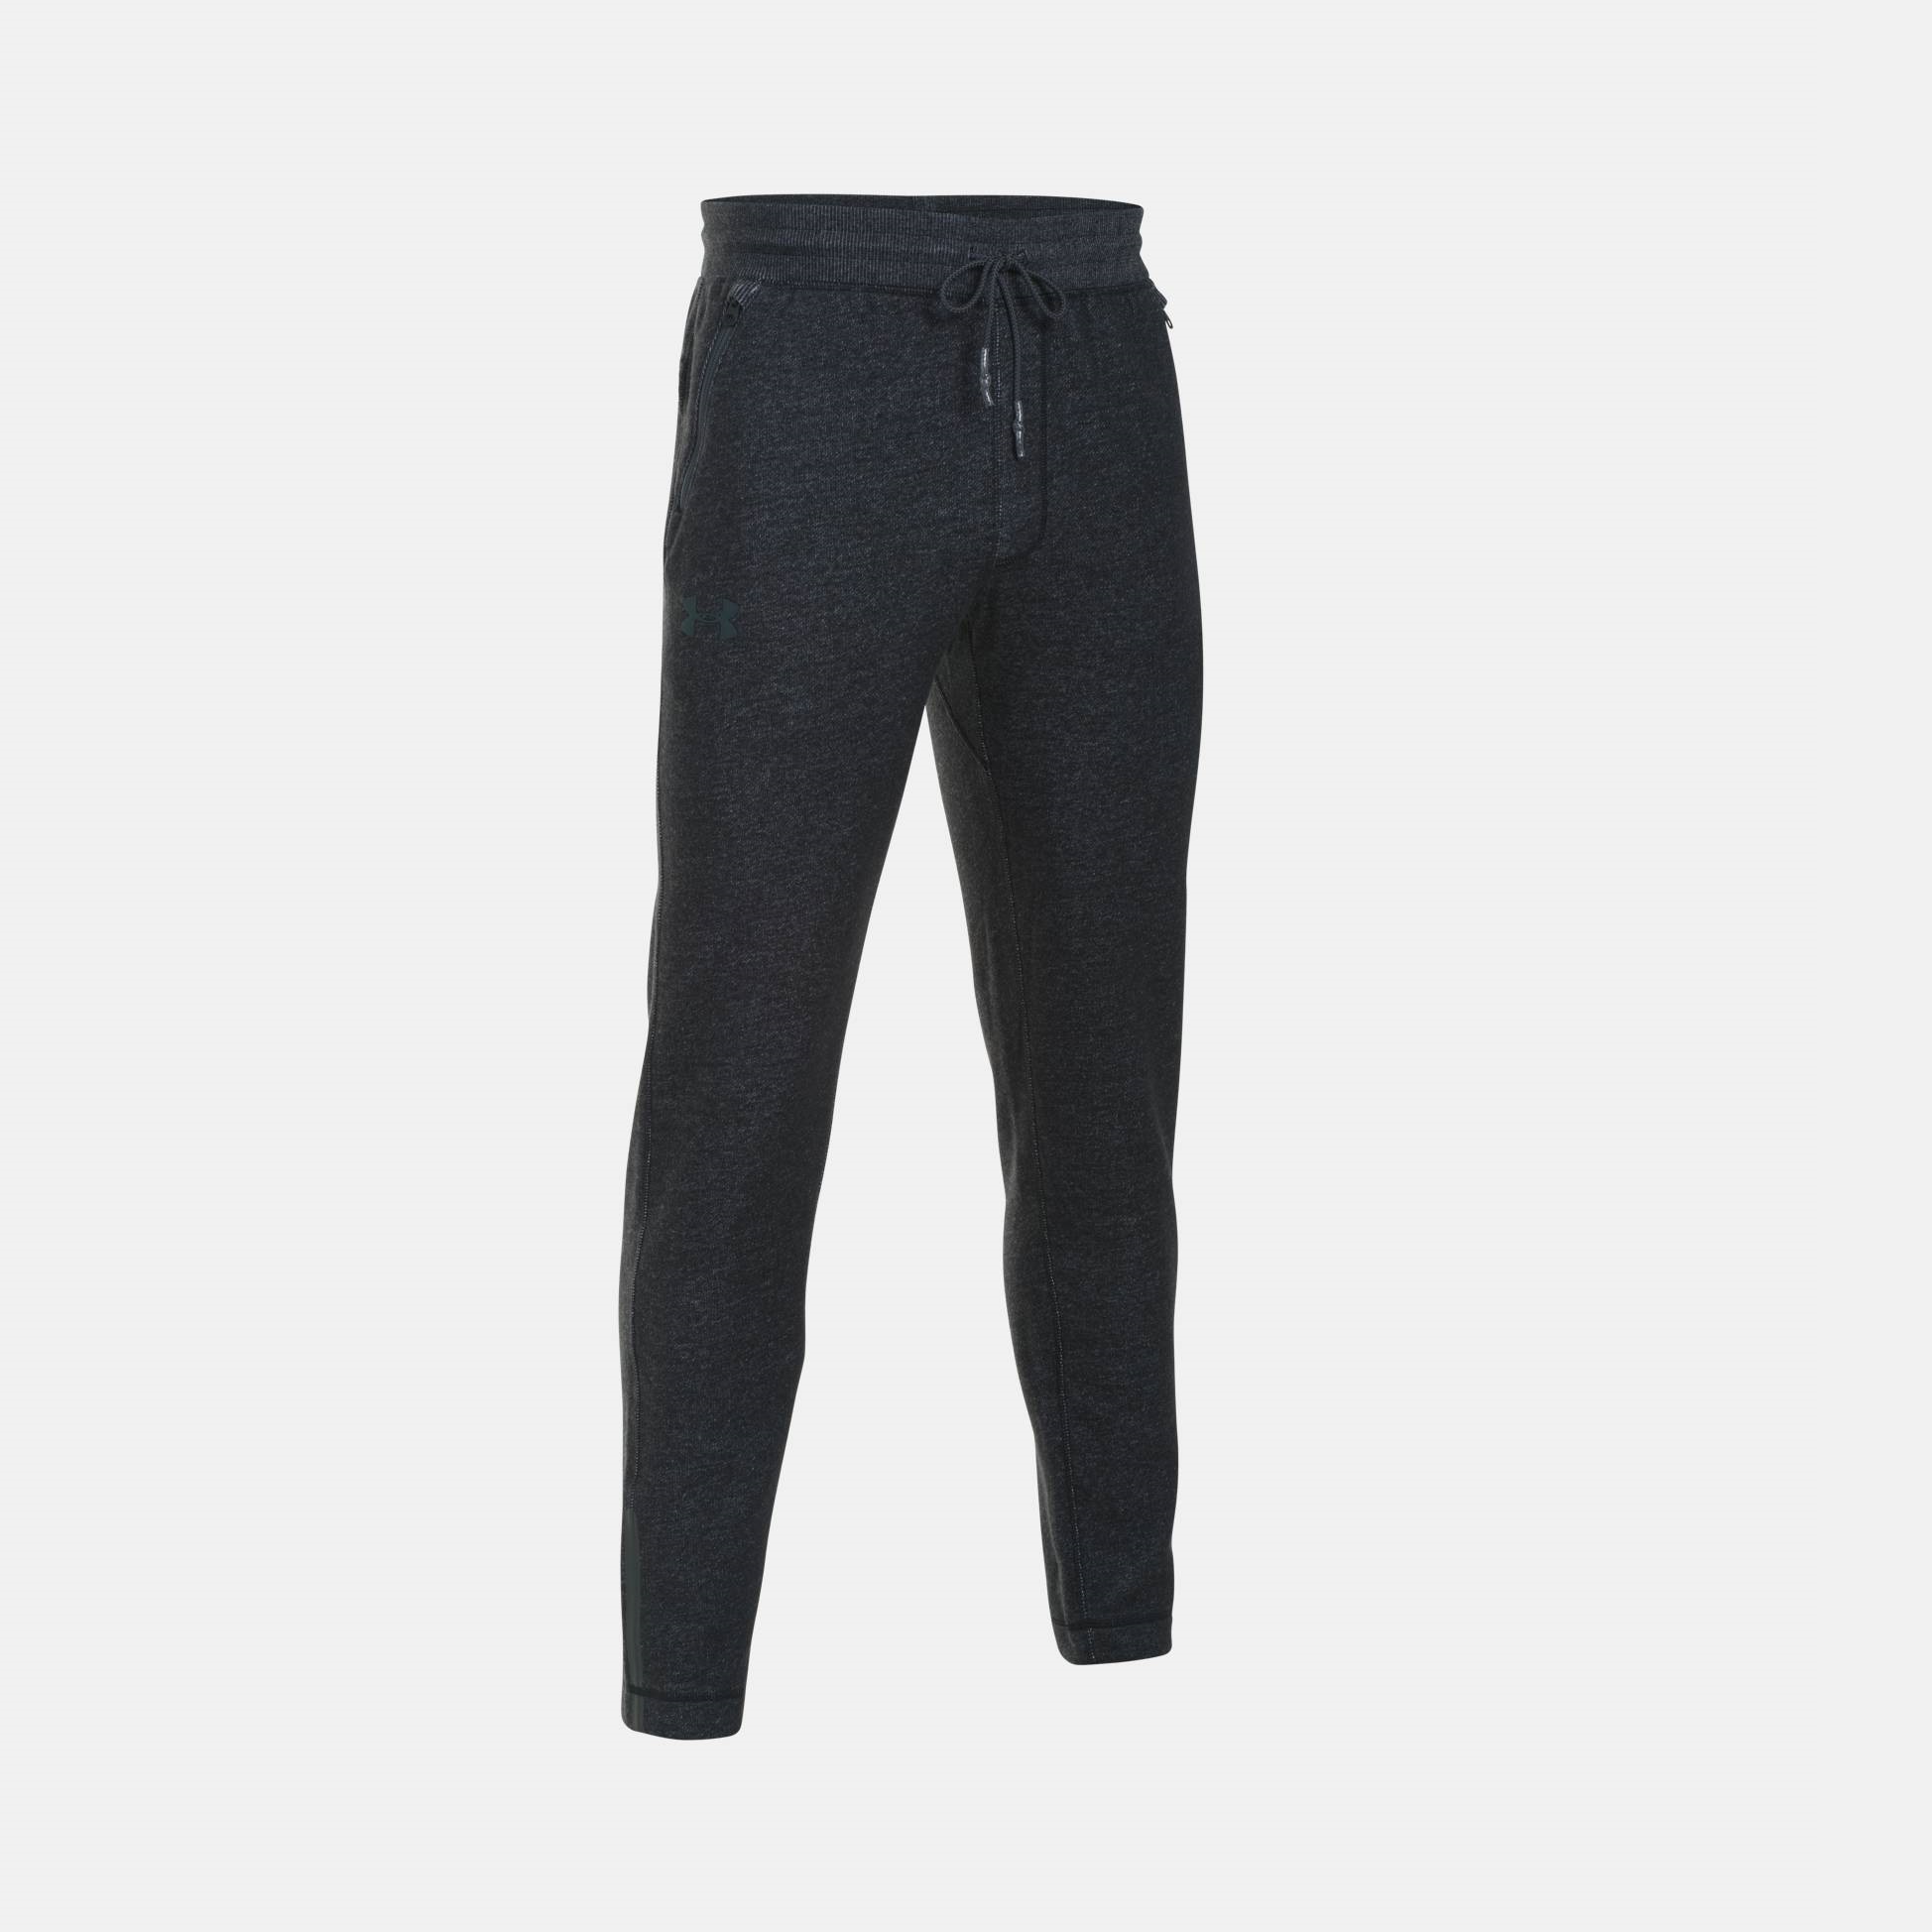  -  under armour Varsity Tapered Pants